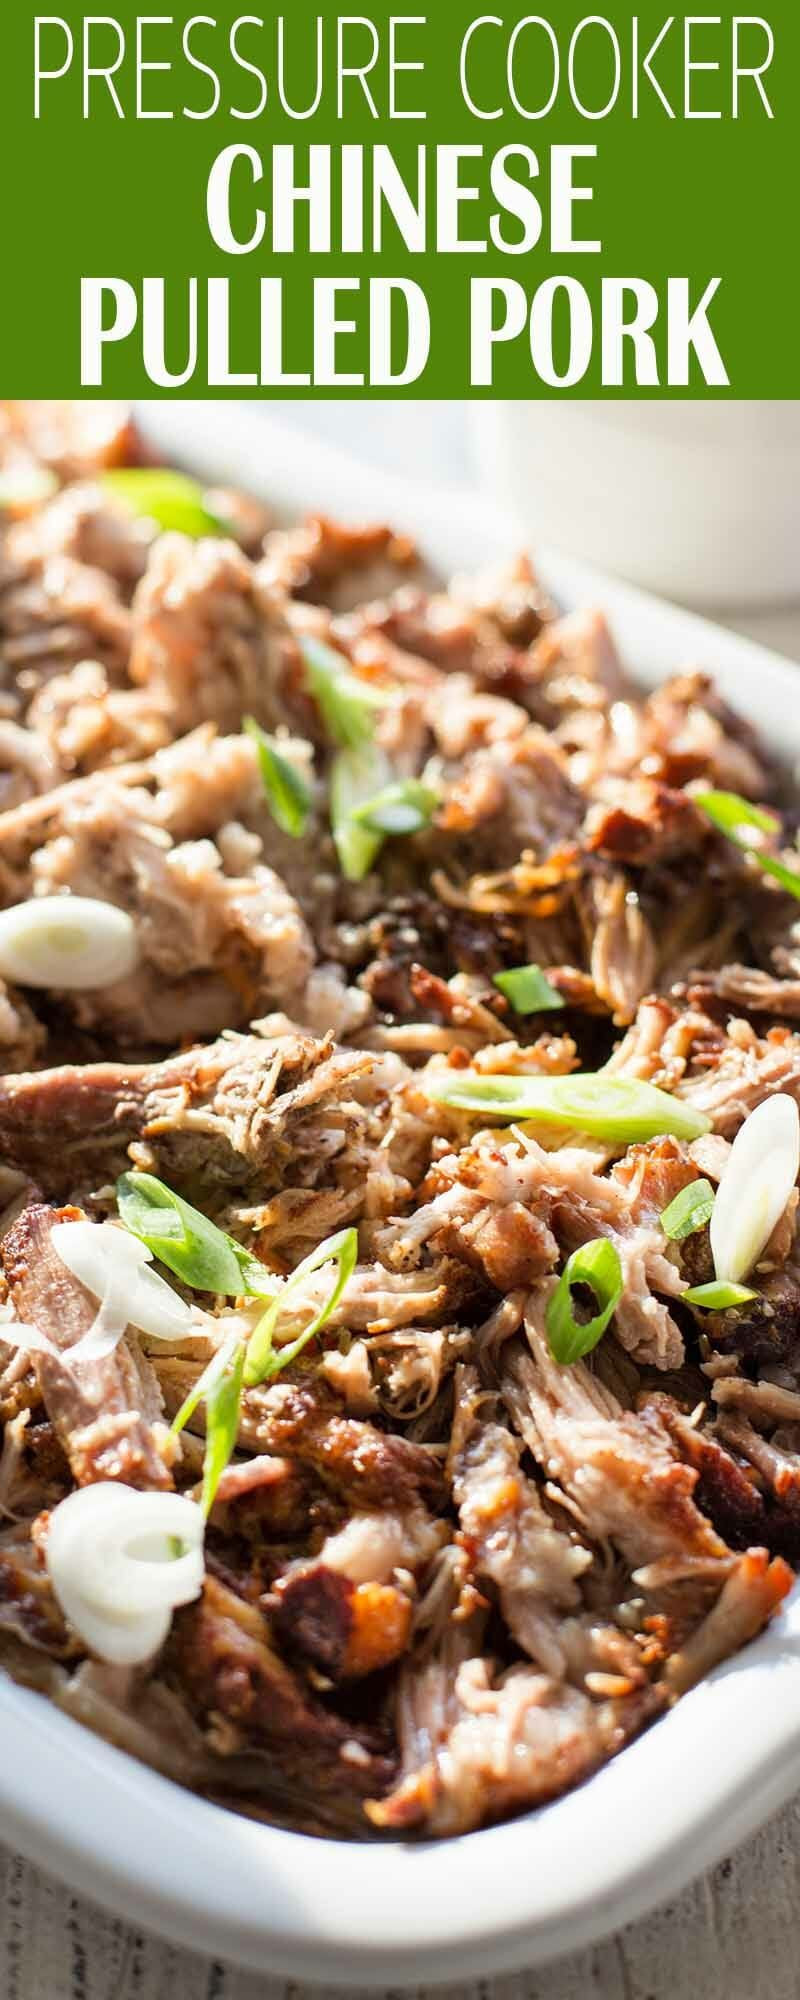 Asian Pressure Cooker Recipes
 Pressure Cooker Chinese Pulled Pork